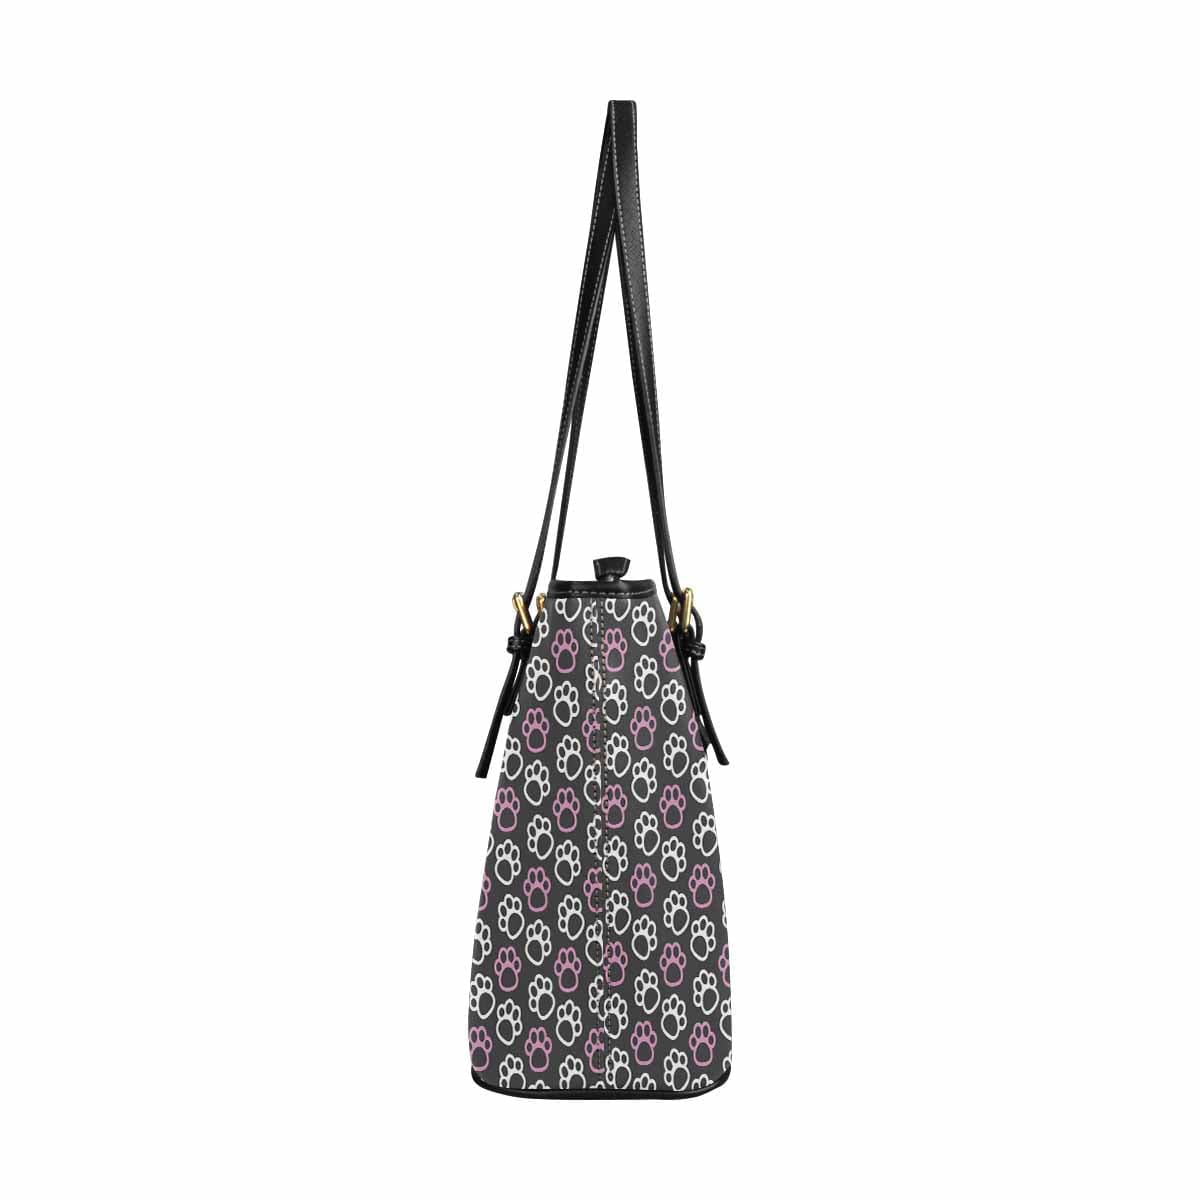 Large Leather Tote Shoulder Bag - Paws Pink And White Tote - Bags | Leather